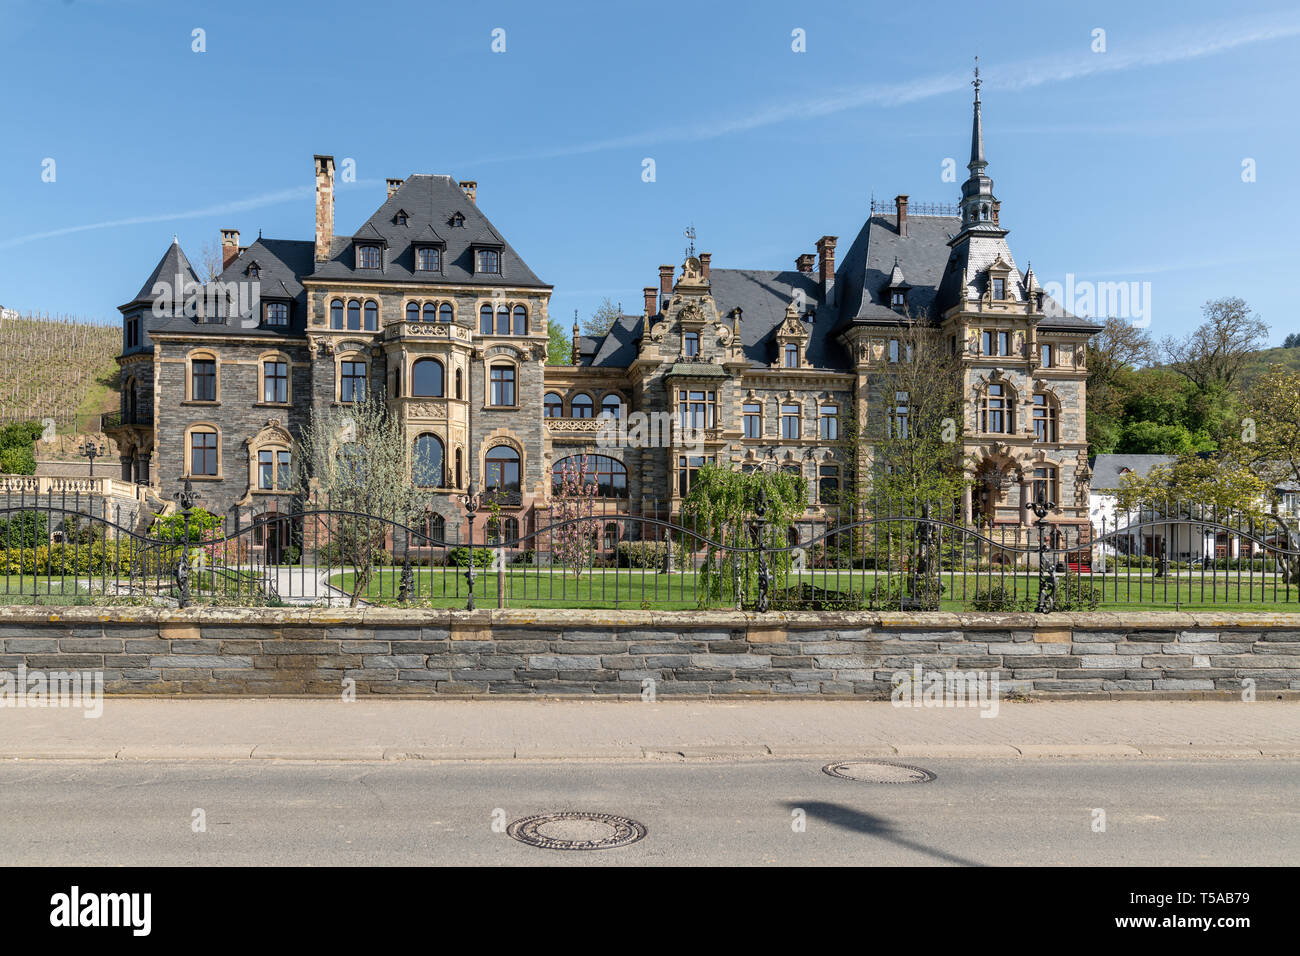 Travel, 22.04.2019, Lieser, Rhineland-Palatinate, Lieser Castle is a castle built in the style of historicism in the wine village of the same name Lie Stock Photo